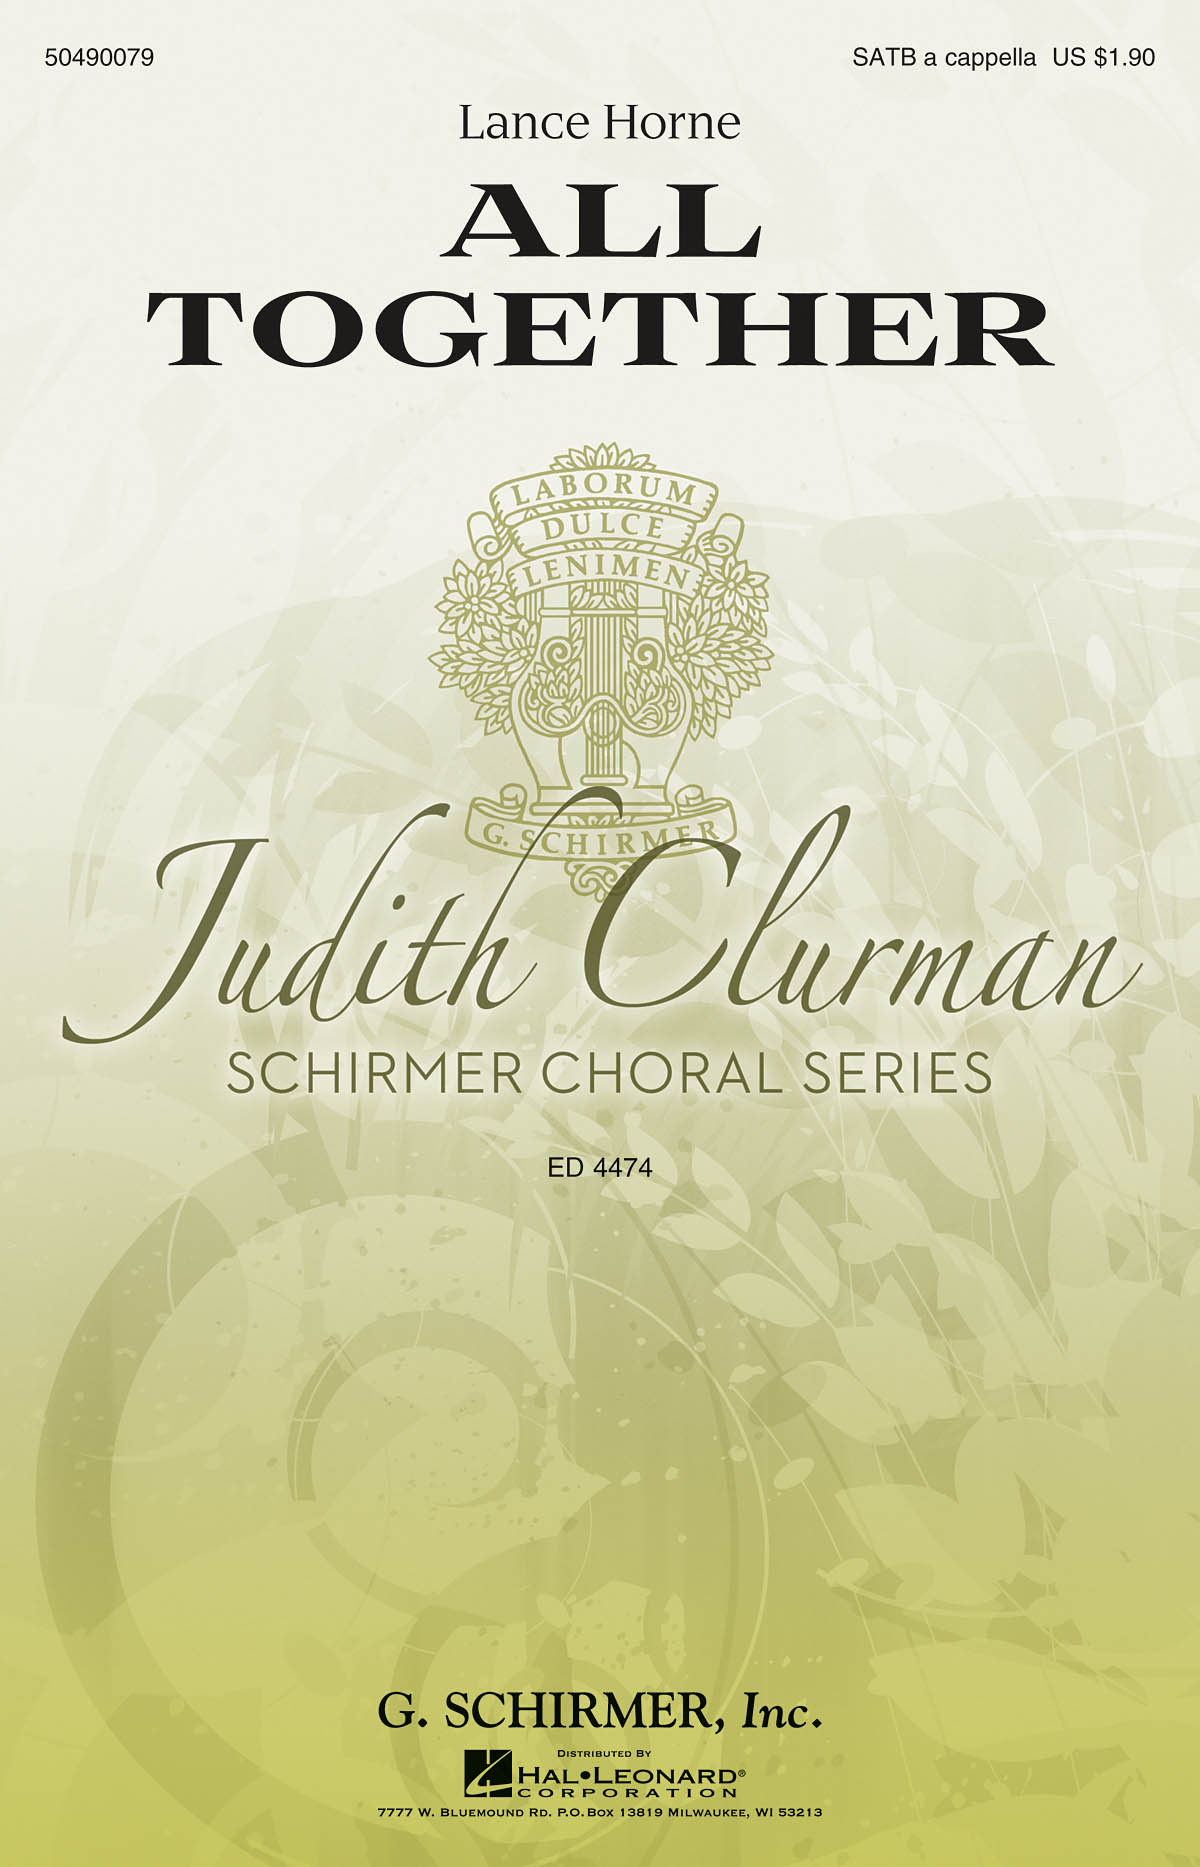 Lance Horne Philip Littell: All Together: SATB: Vocal Score